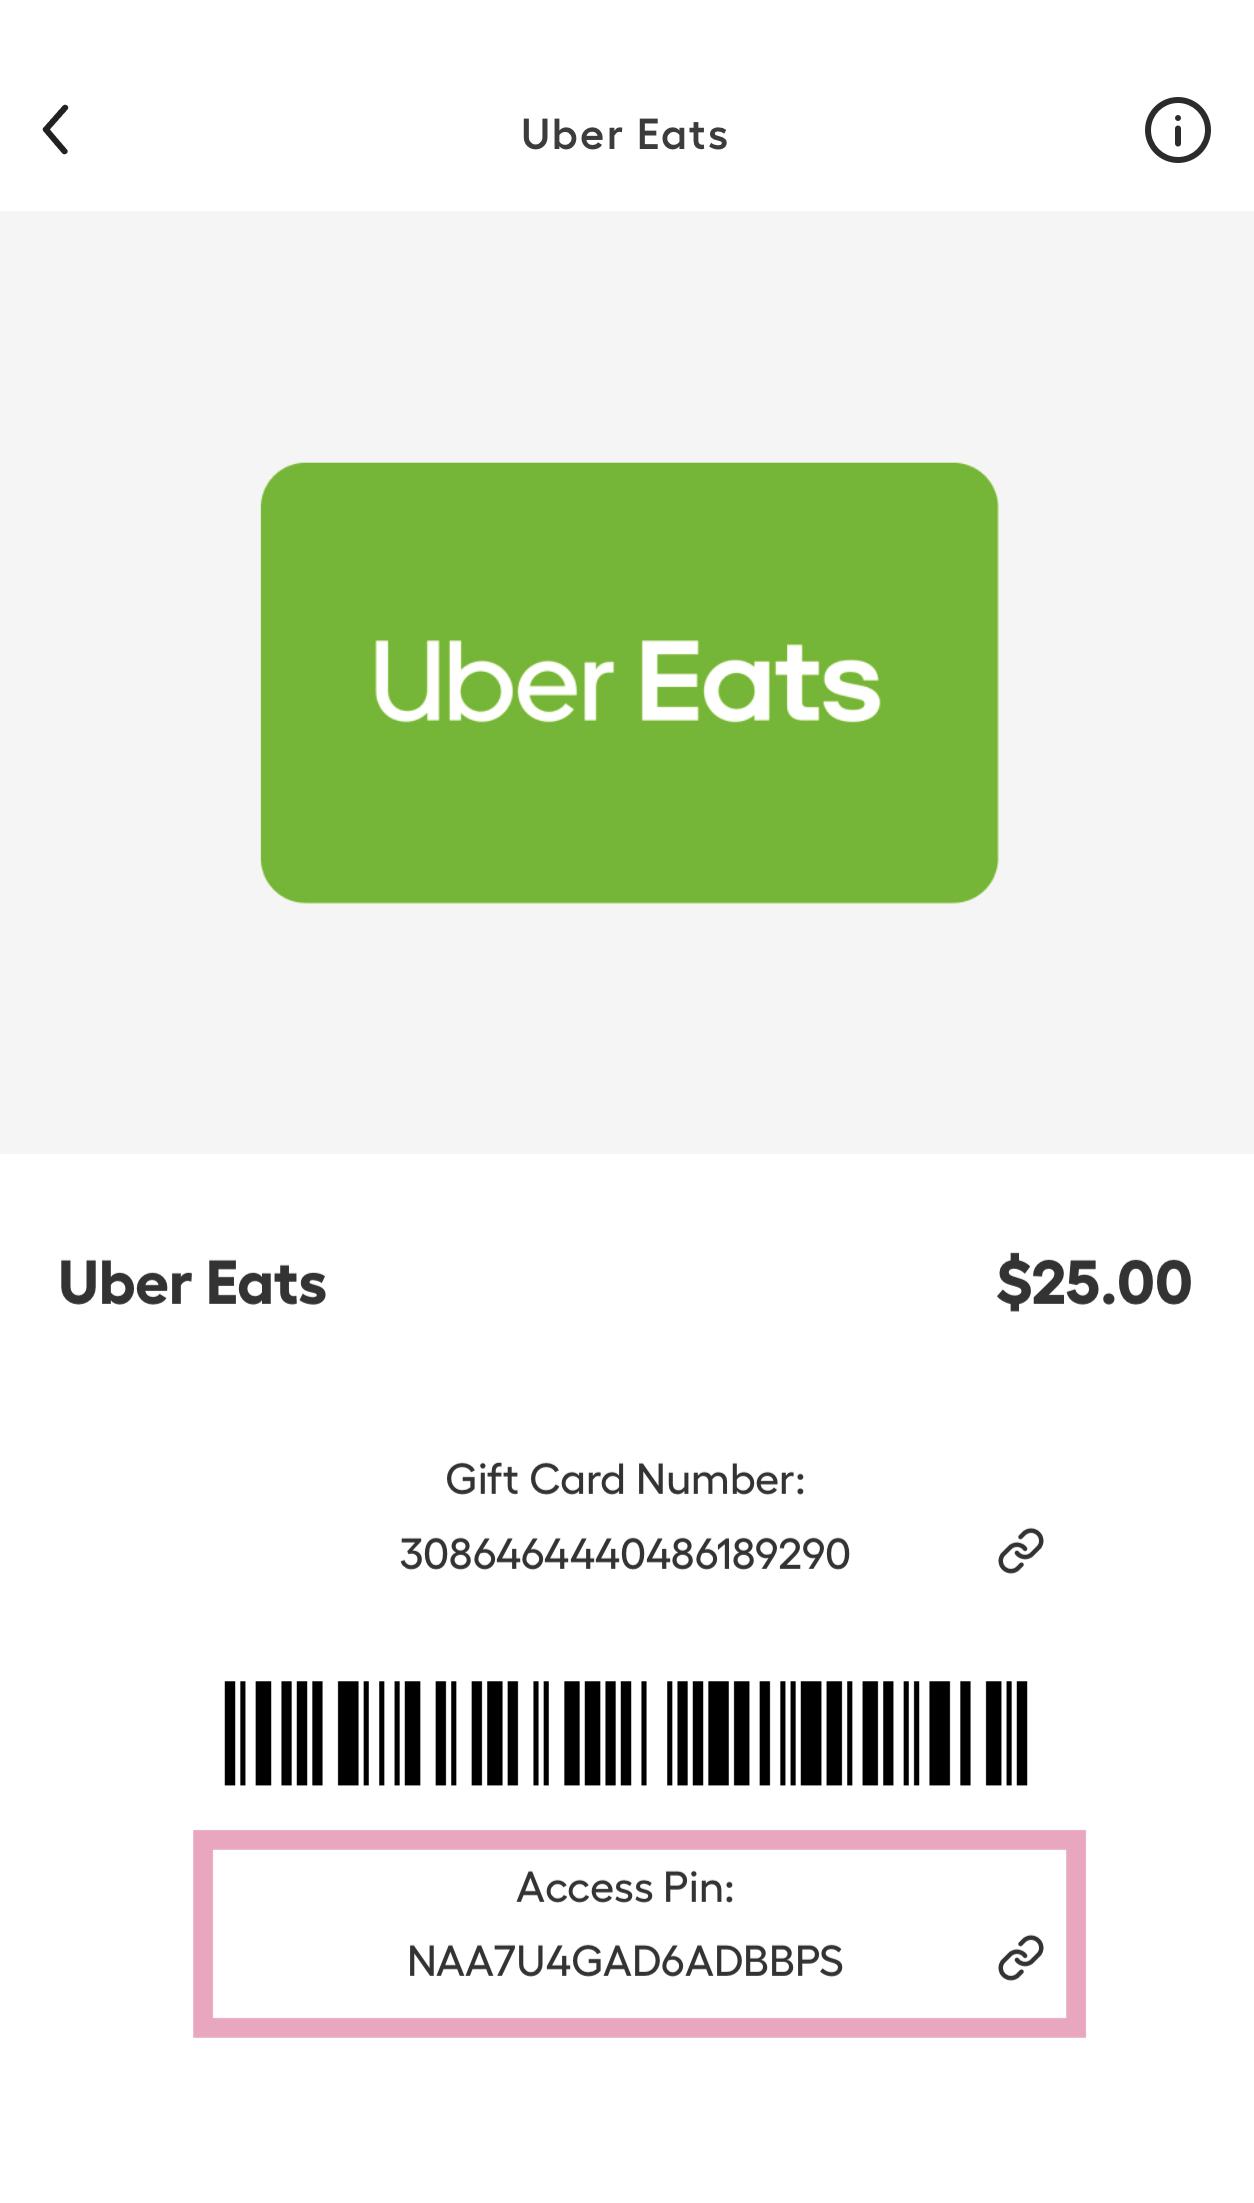 How to Use an Uber Gift Card to Pay for Your Rides